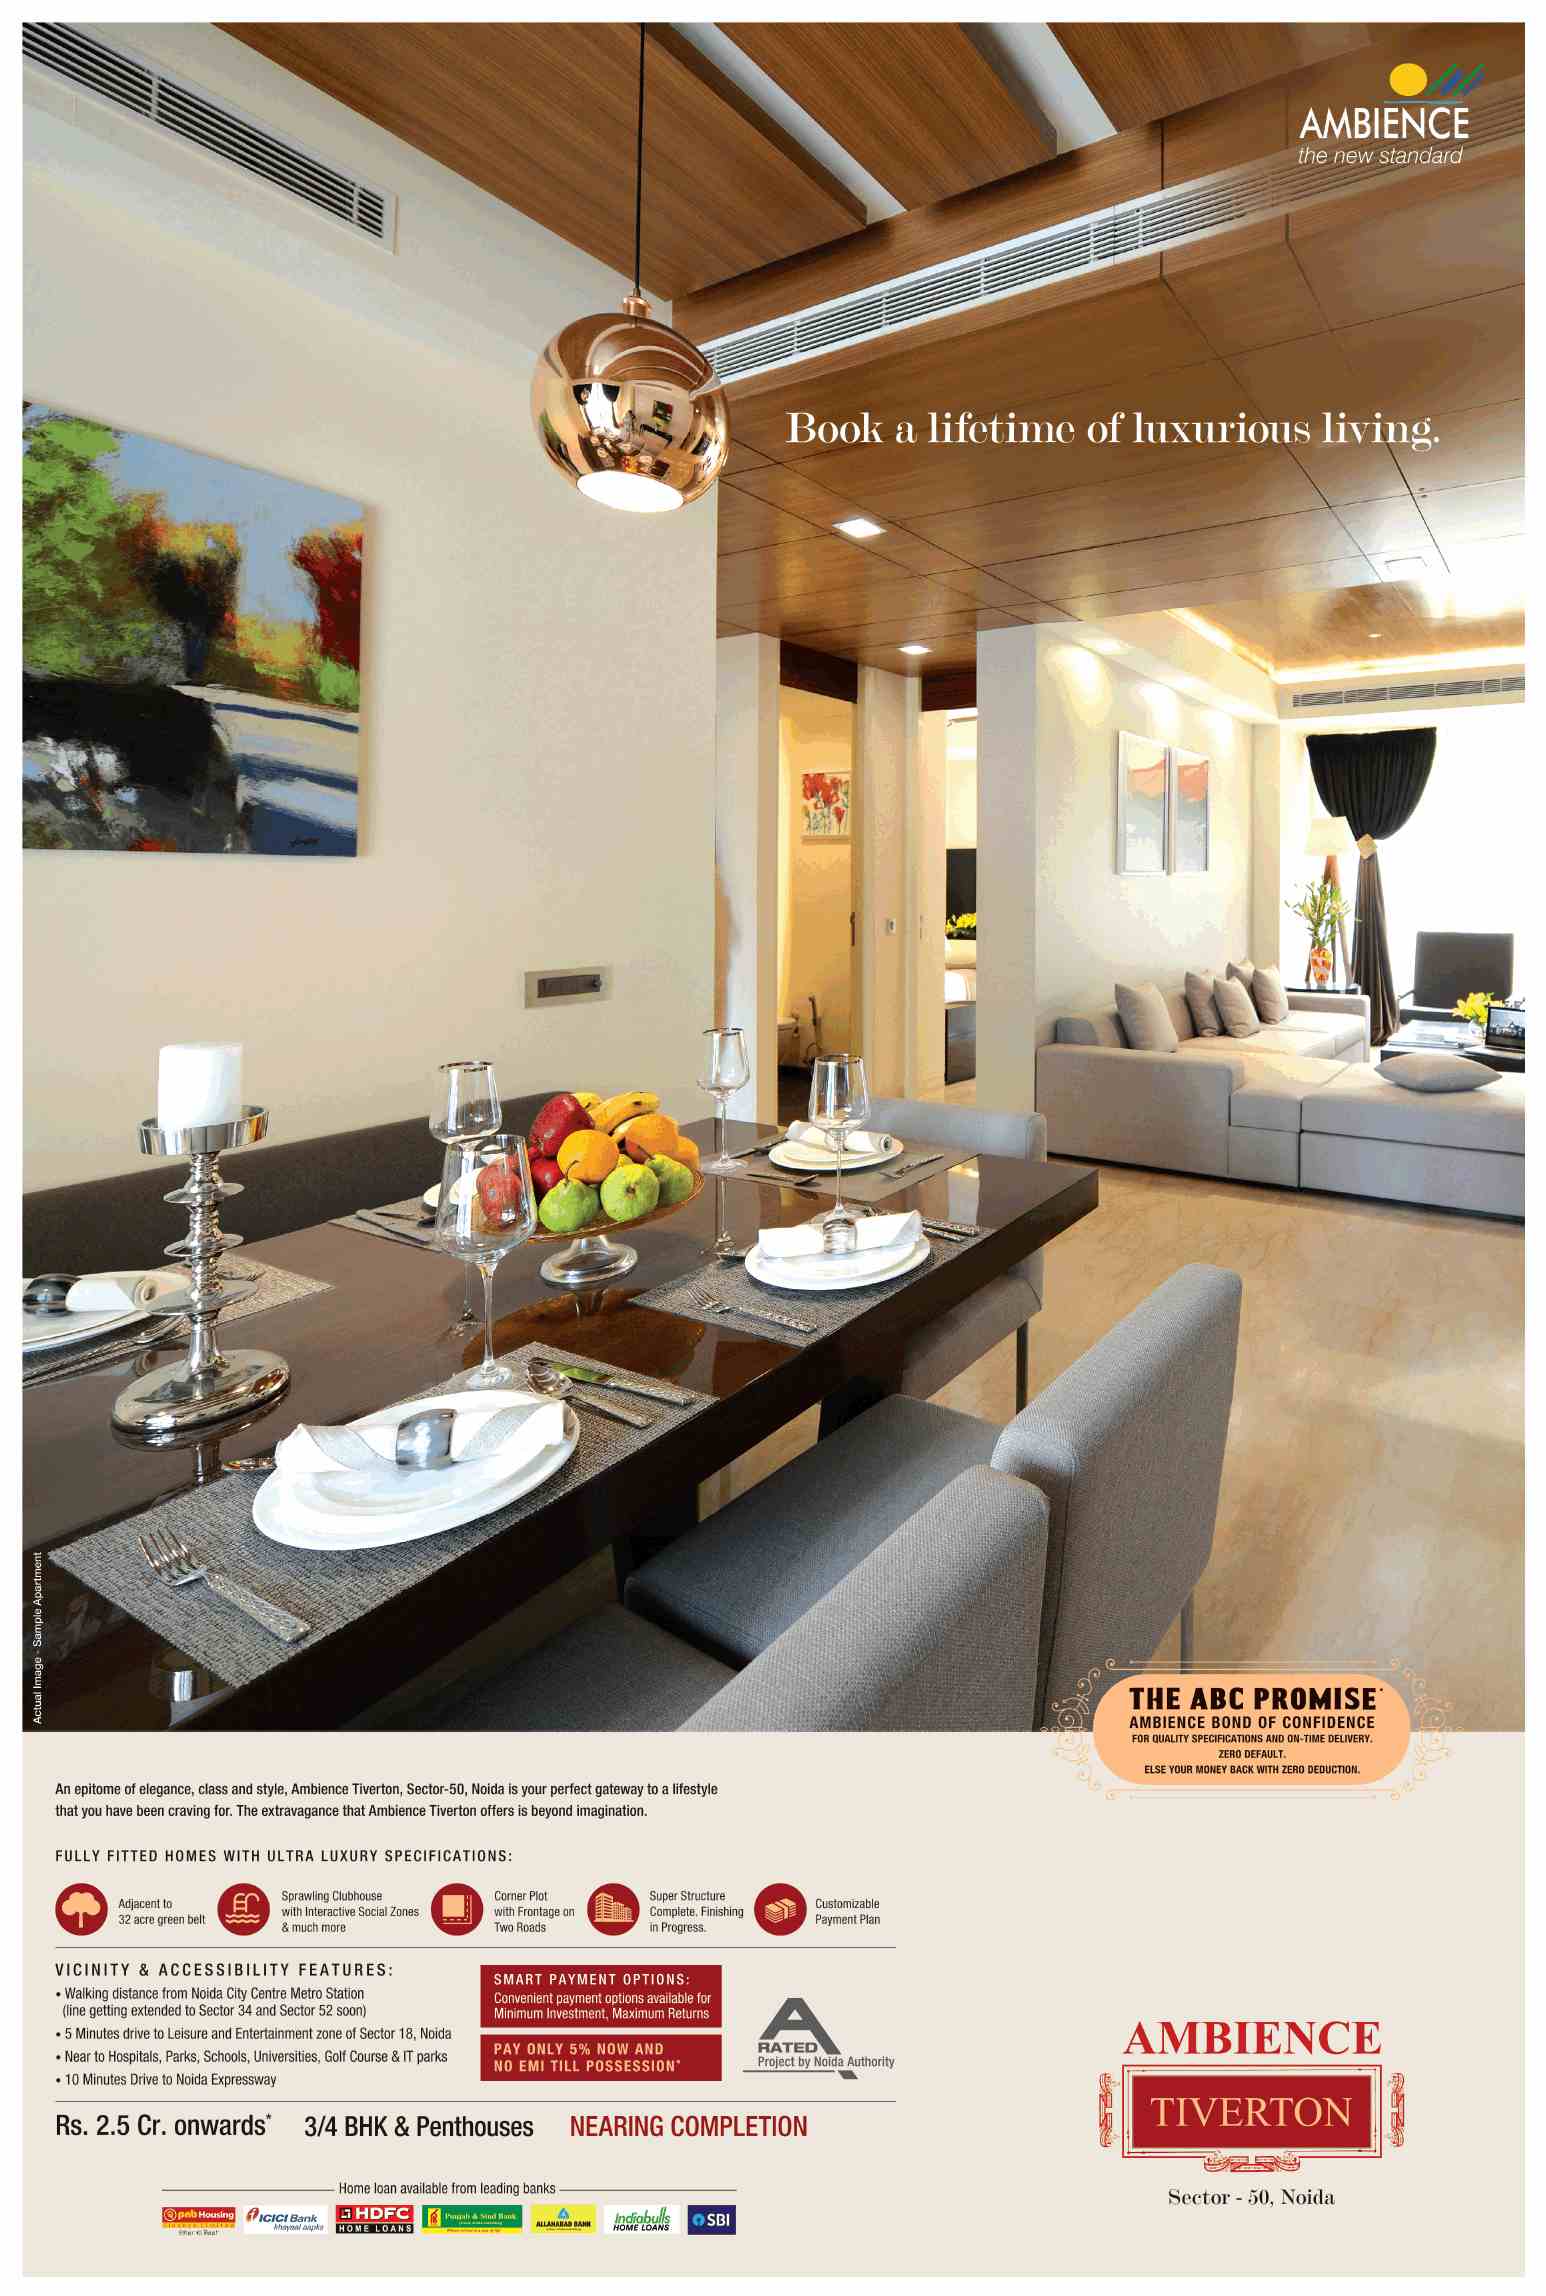 Book a lifetime of luxurious living at Ambience Tiverton in Noida